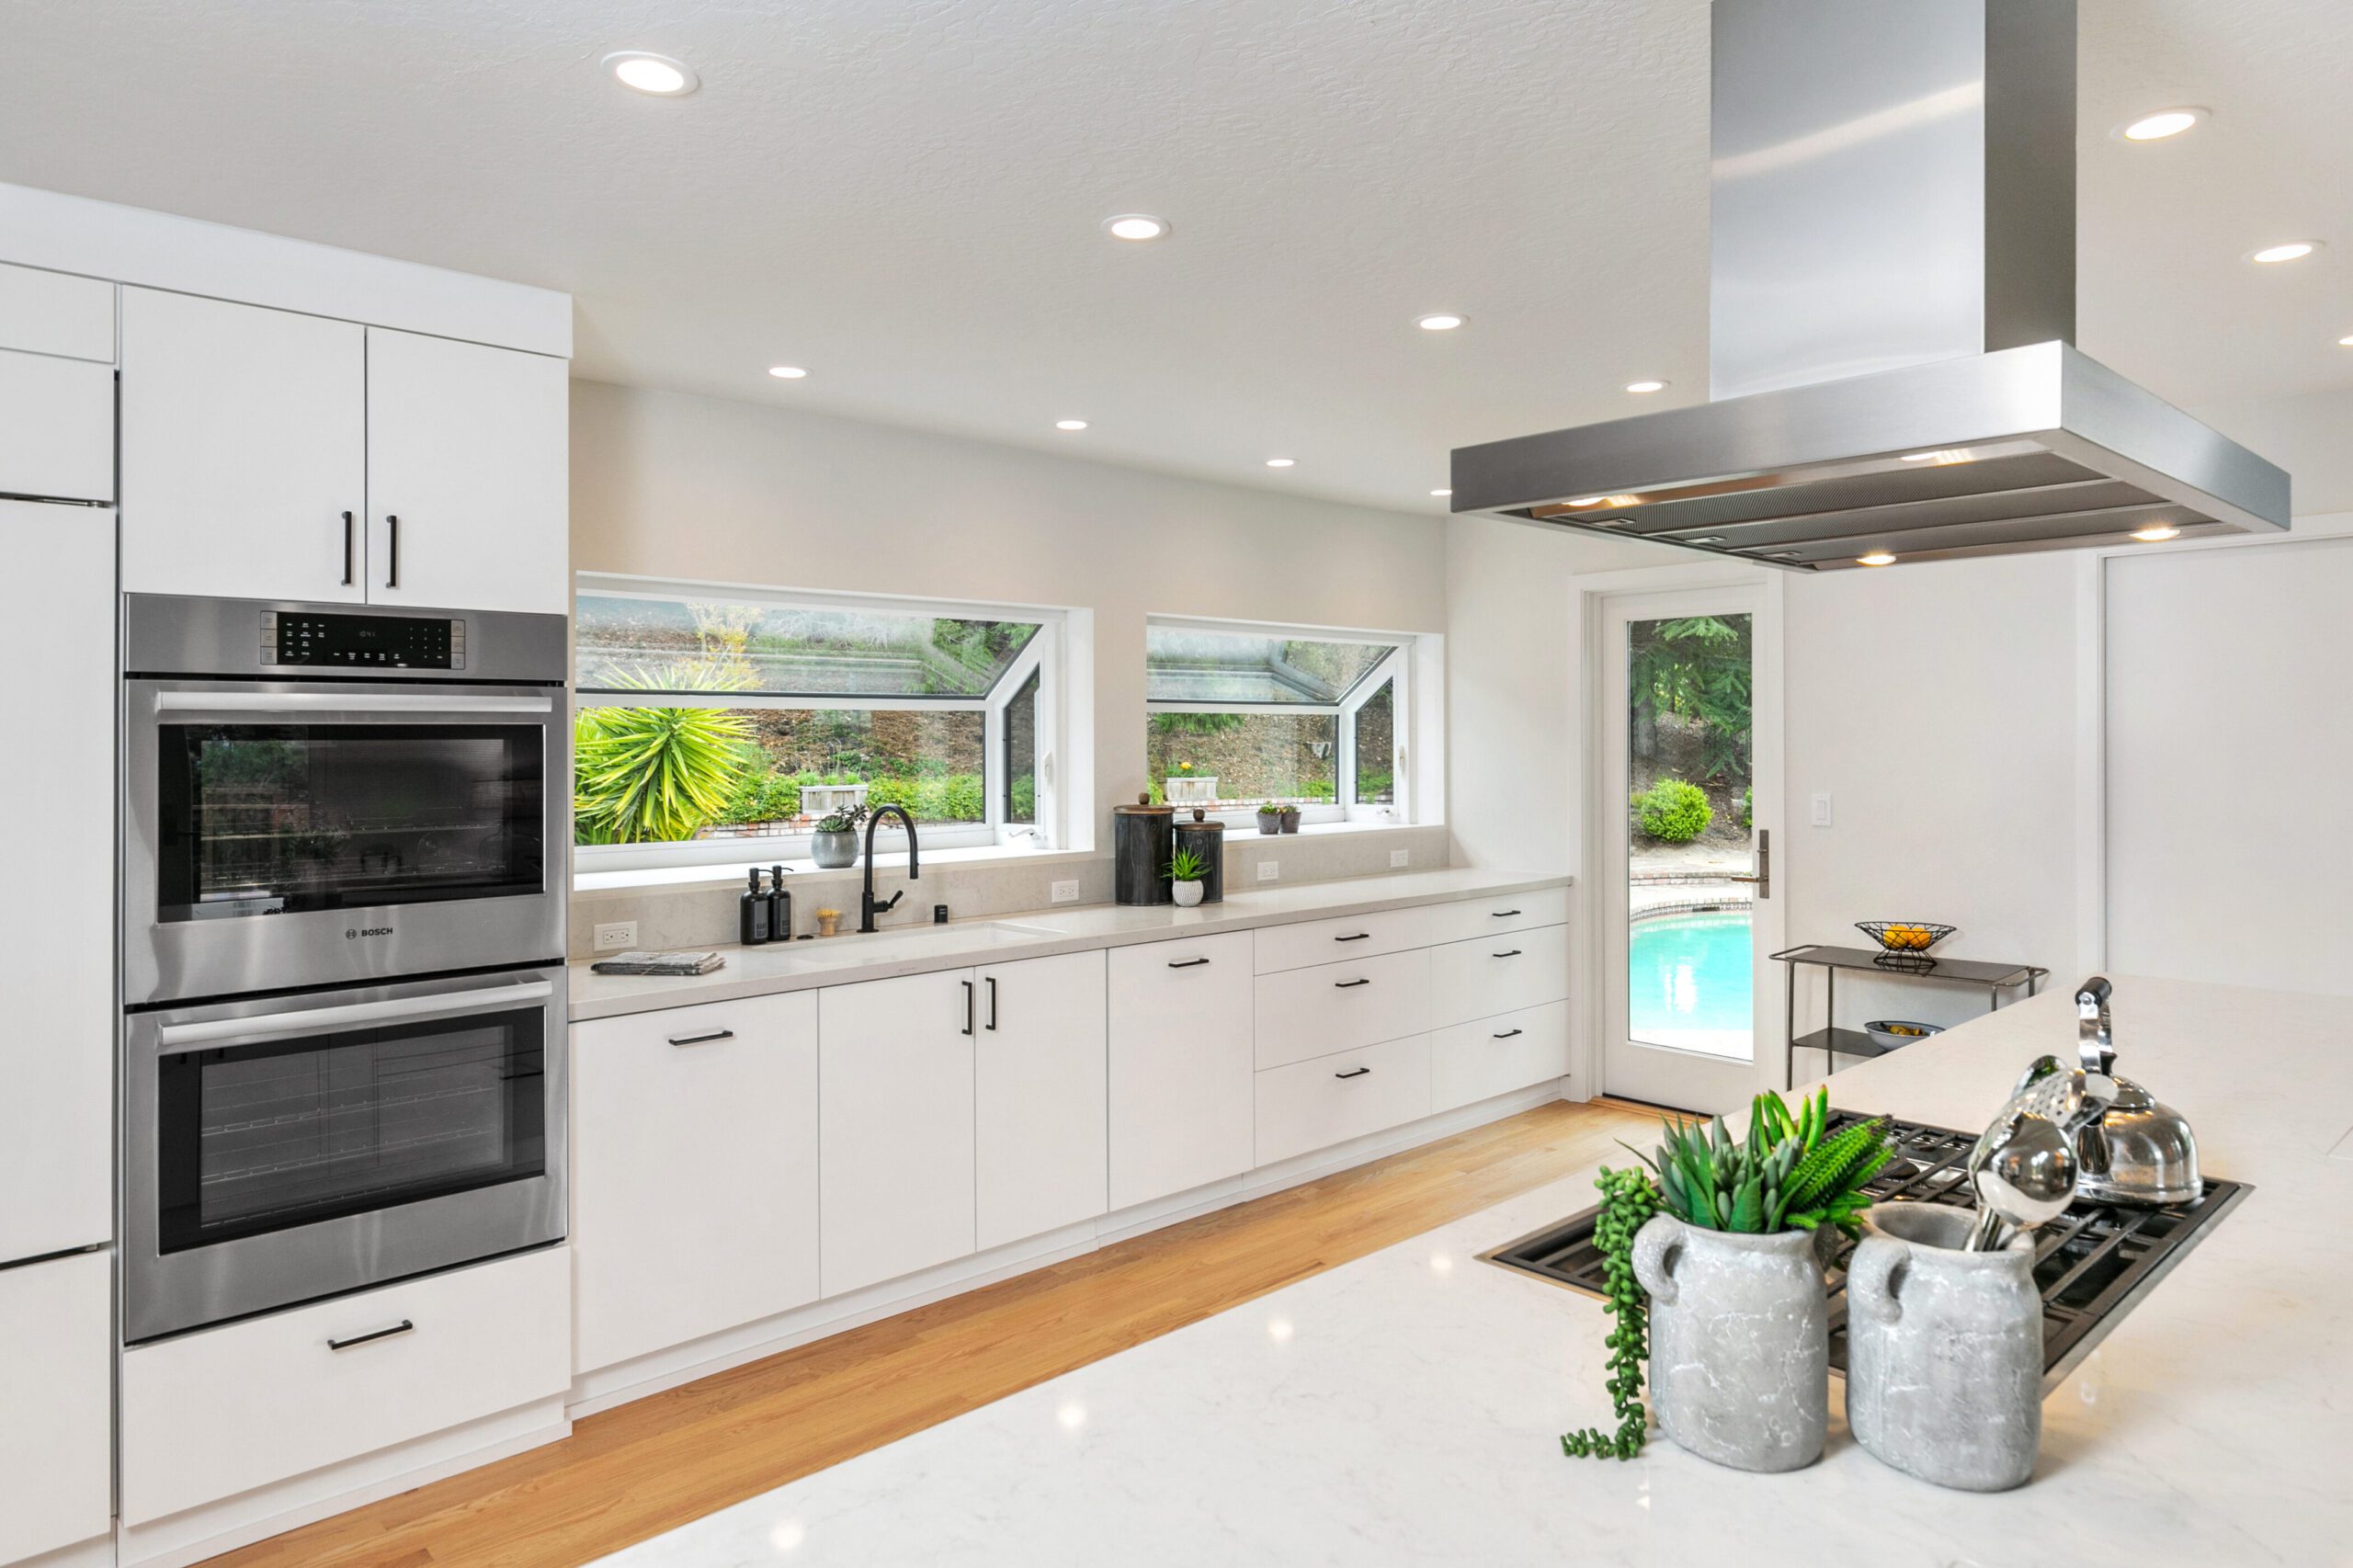 white kitchen remodel with double ovens and cooktop wood floors garden window